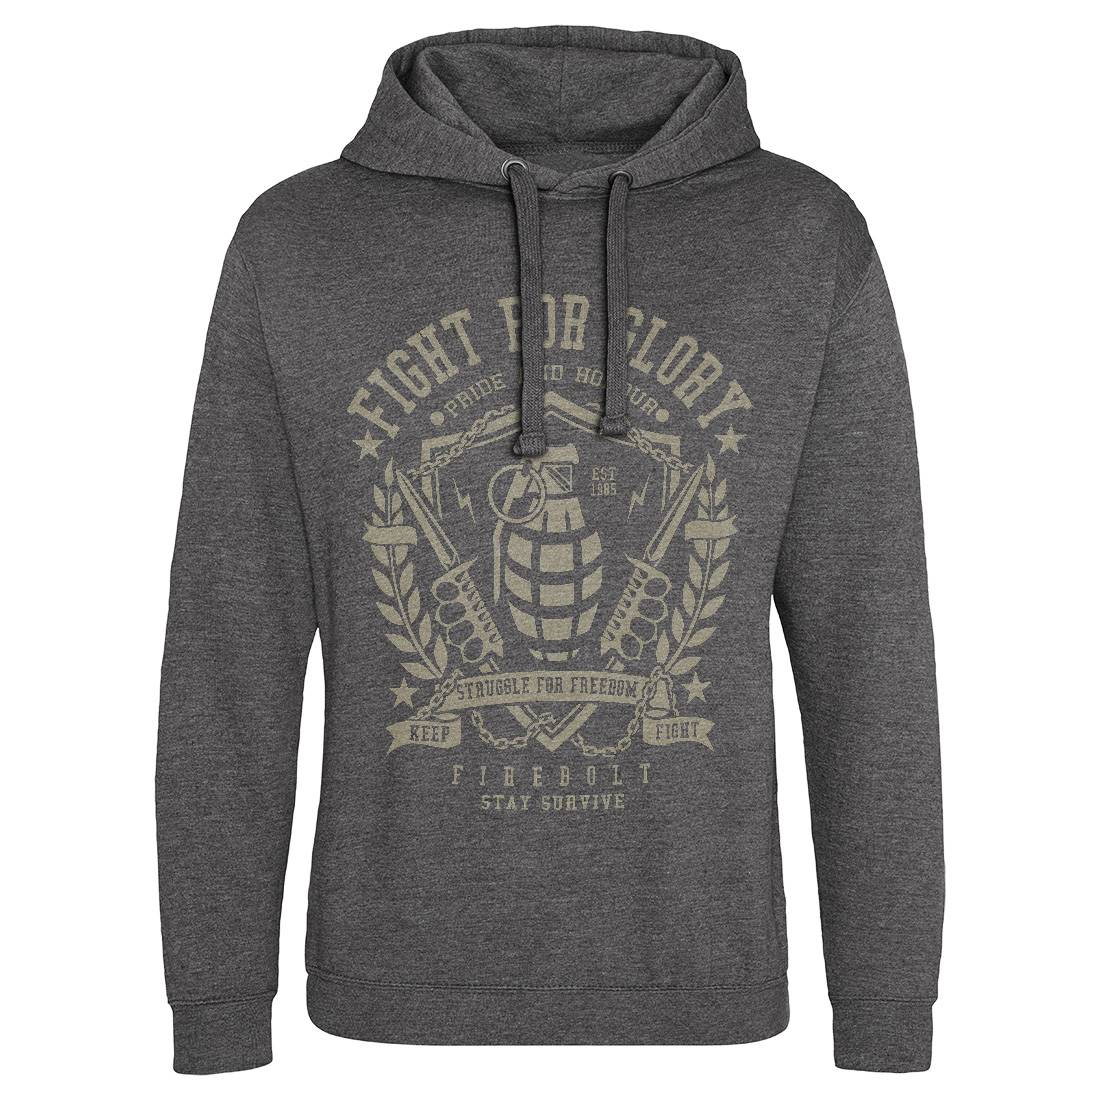 Grenade Mens Hoodie Without Pocket Army A061